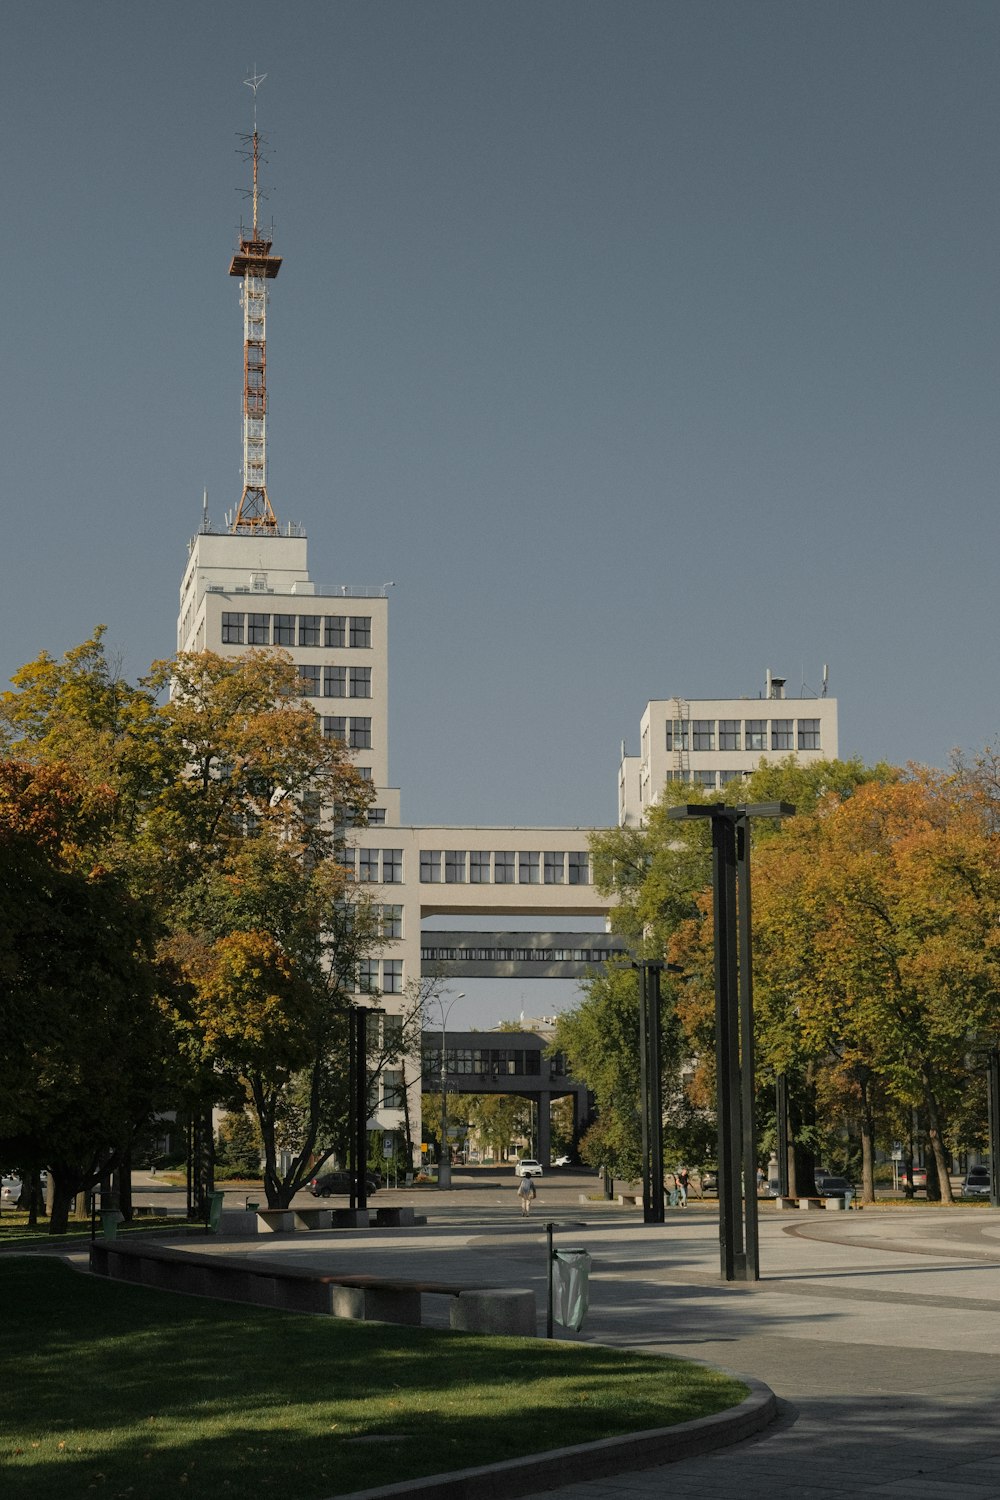 a large white building with a tower in the background